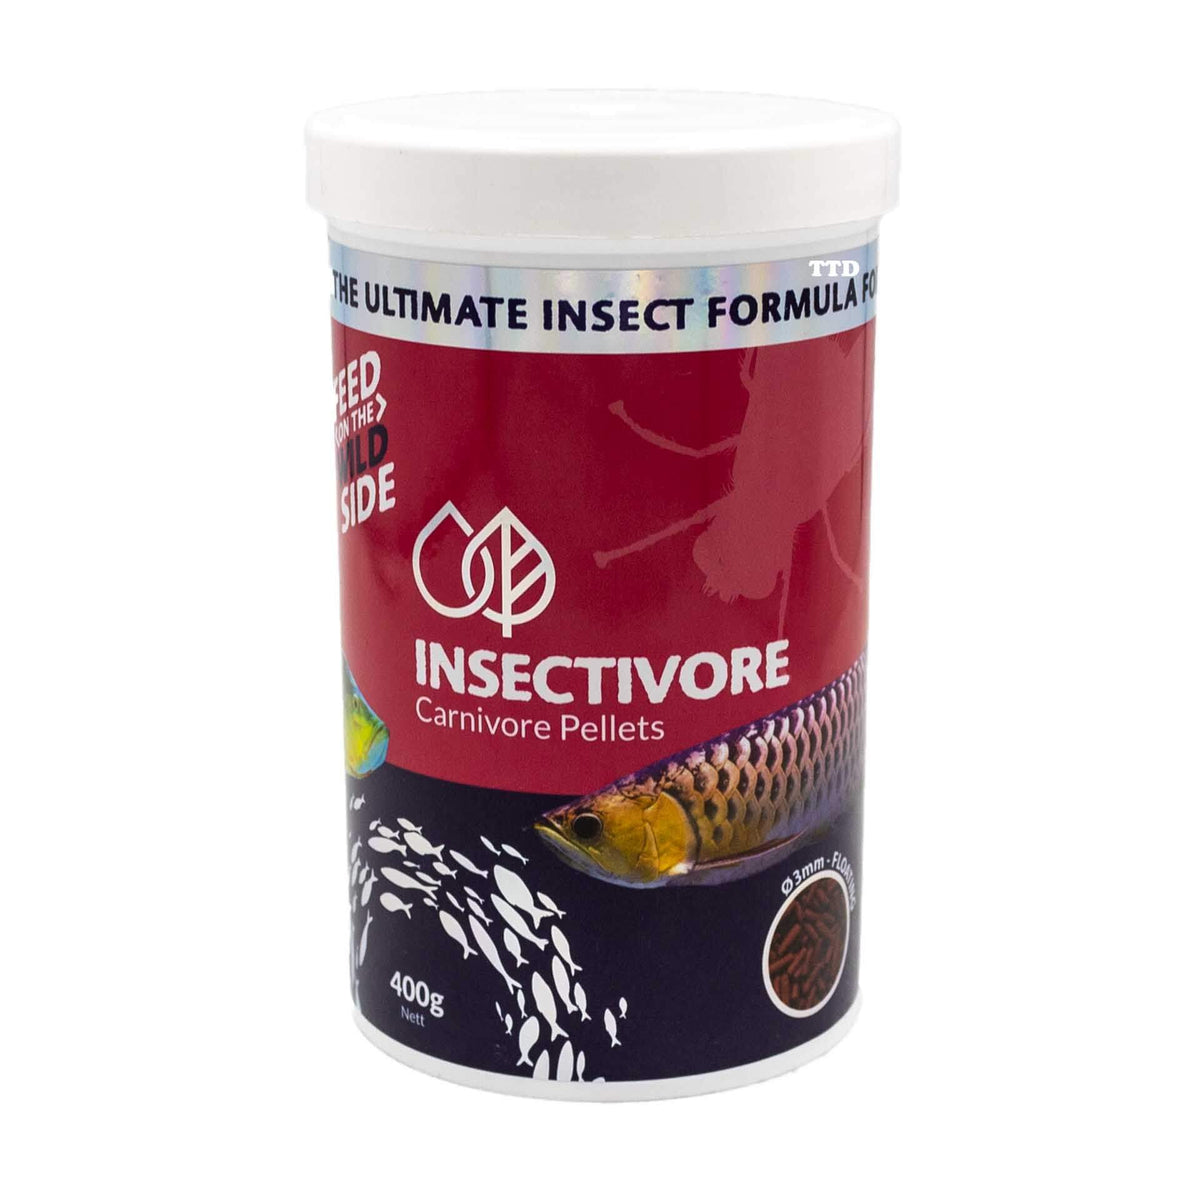 Bioscape Insectivore Carnivore 400g Floating 3mm Pellet Fish Food